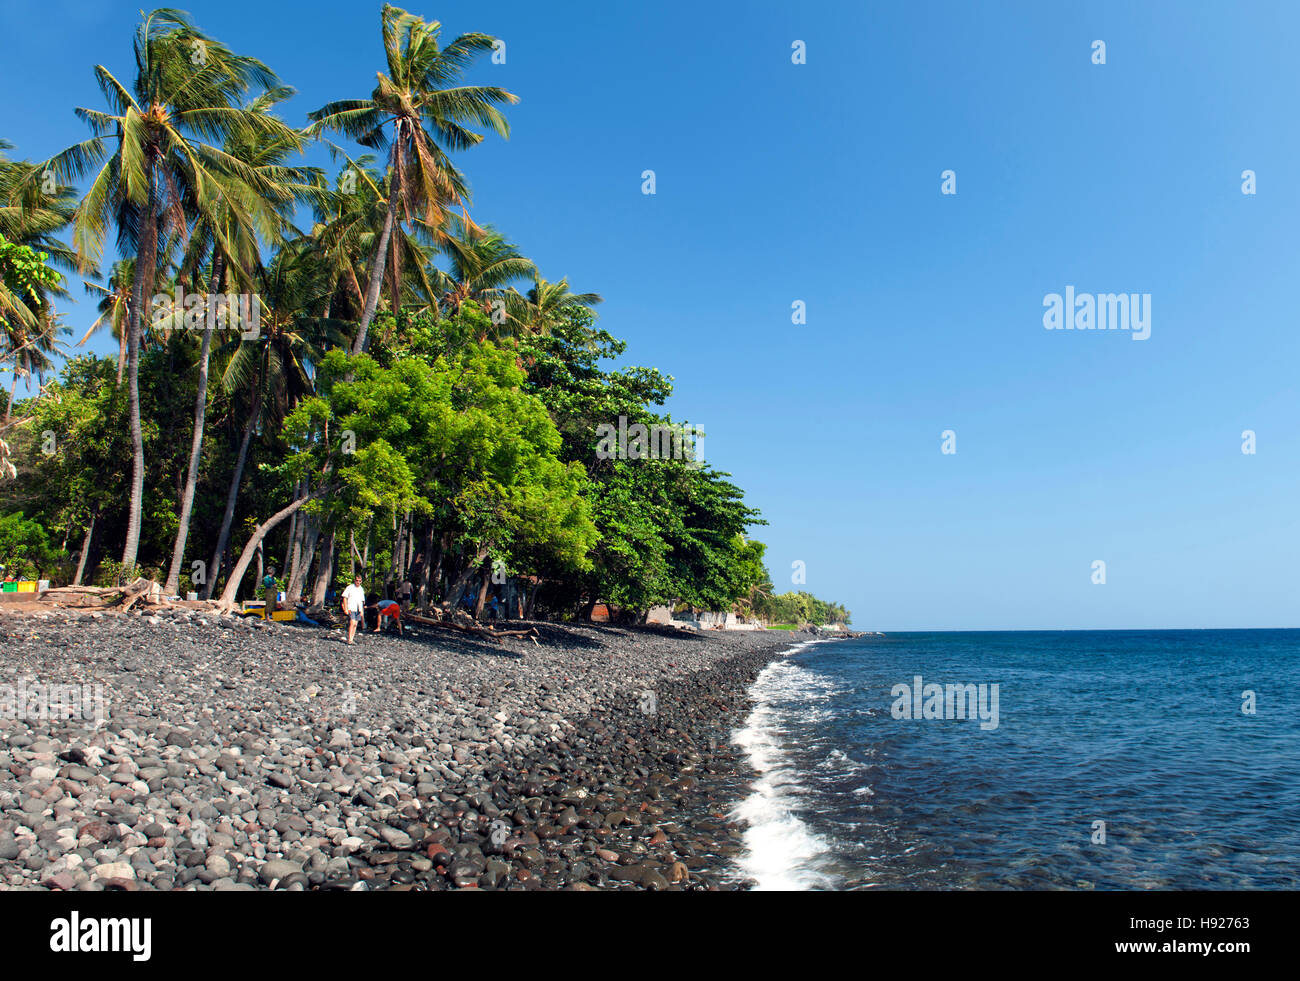 The rocky beach at Tulamben near Amed on the northeastern coast of Bali in Indonesia. Stock Photo